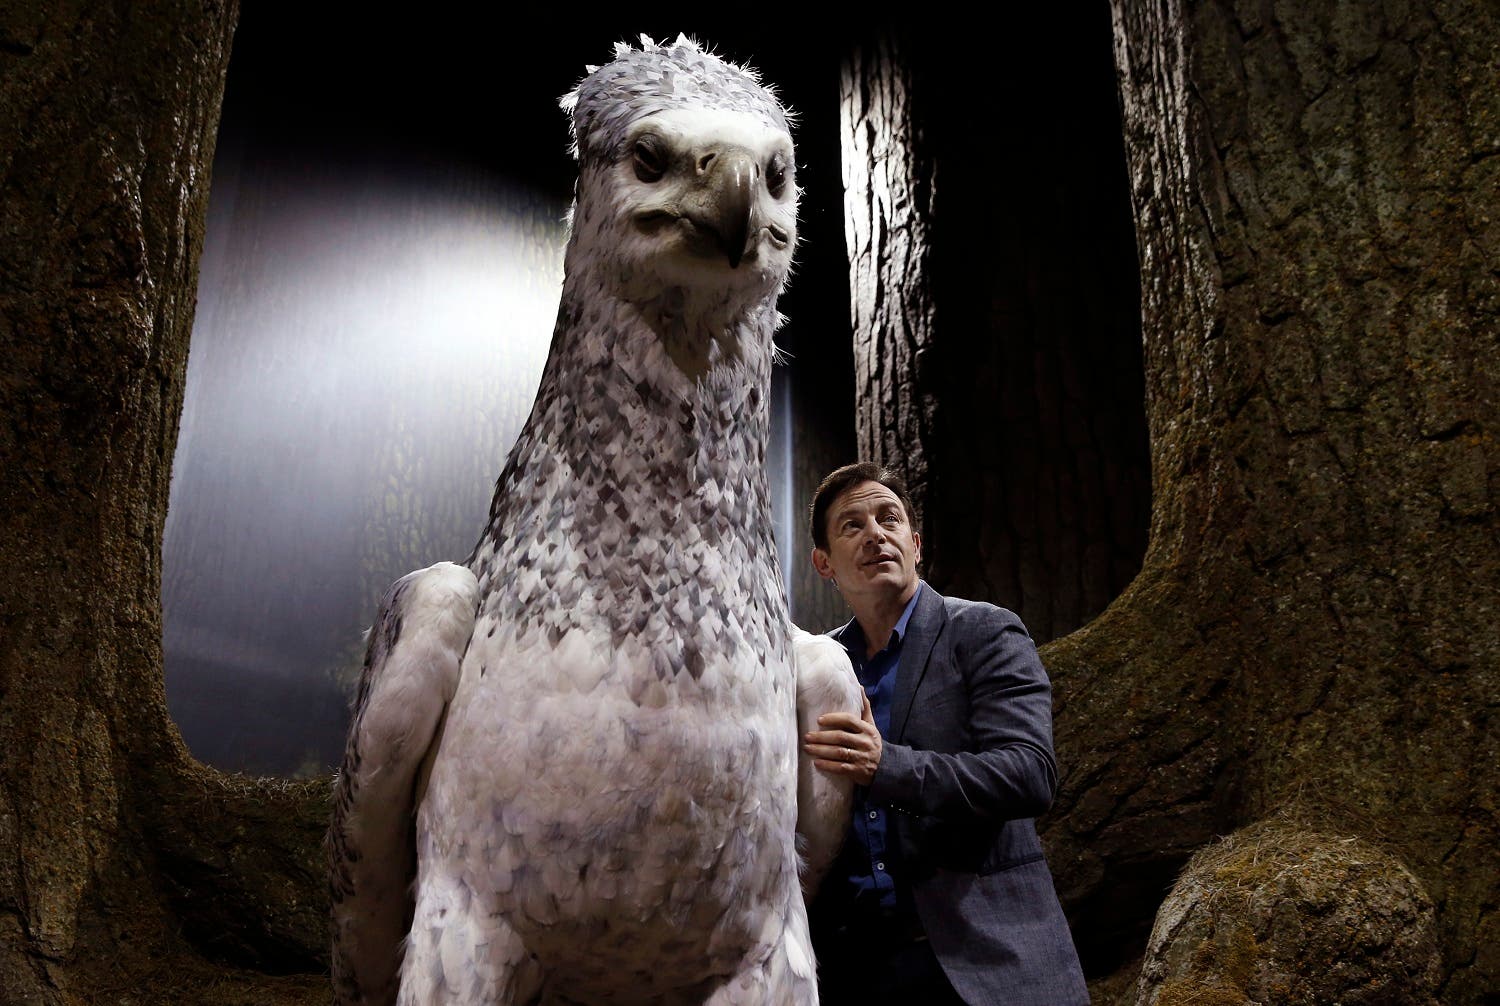 Actor Jason Isaacs poses for the media next to Buckbeak at a new extension called the 'Forbidden Forest' to the Warner Brothers studio tour 'The Making of Harry Potter' in Watford, England, Wednesday, March 8, 2017. (AP)